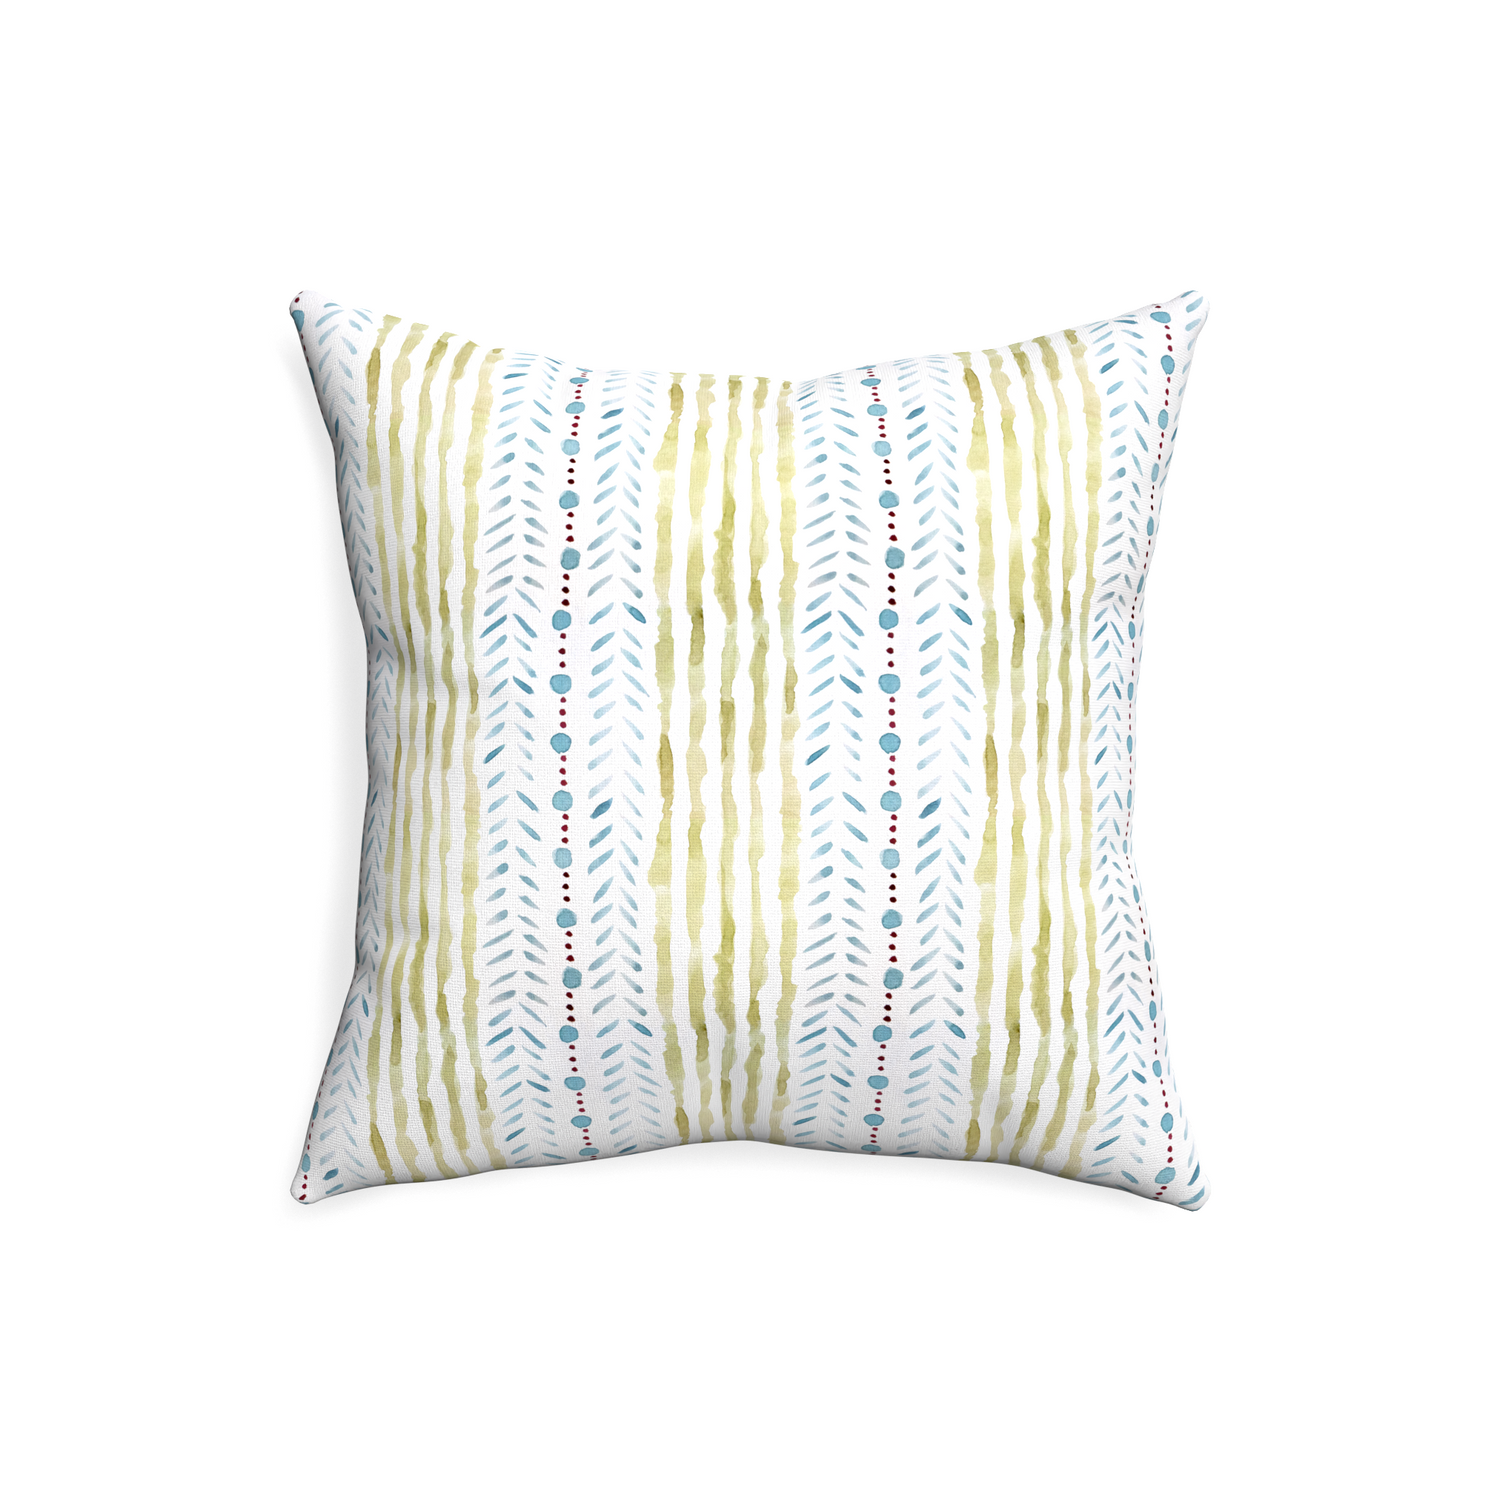 20-square julia custom blue & green stripedpillow with none on white background